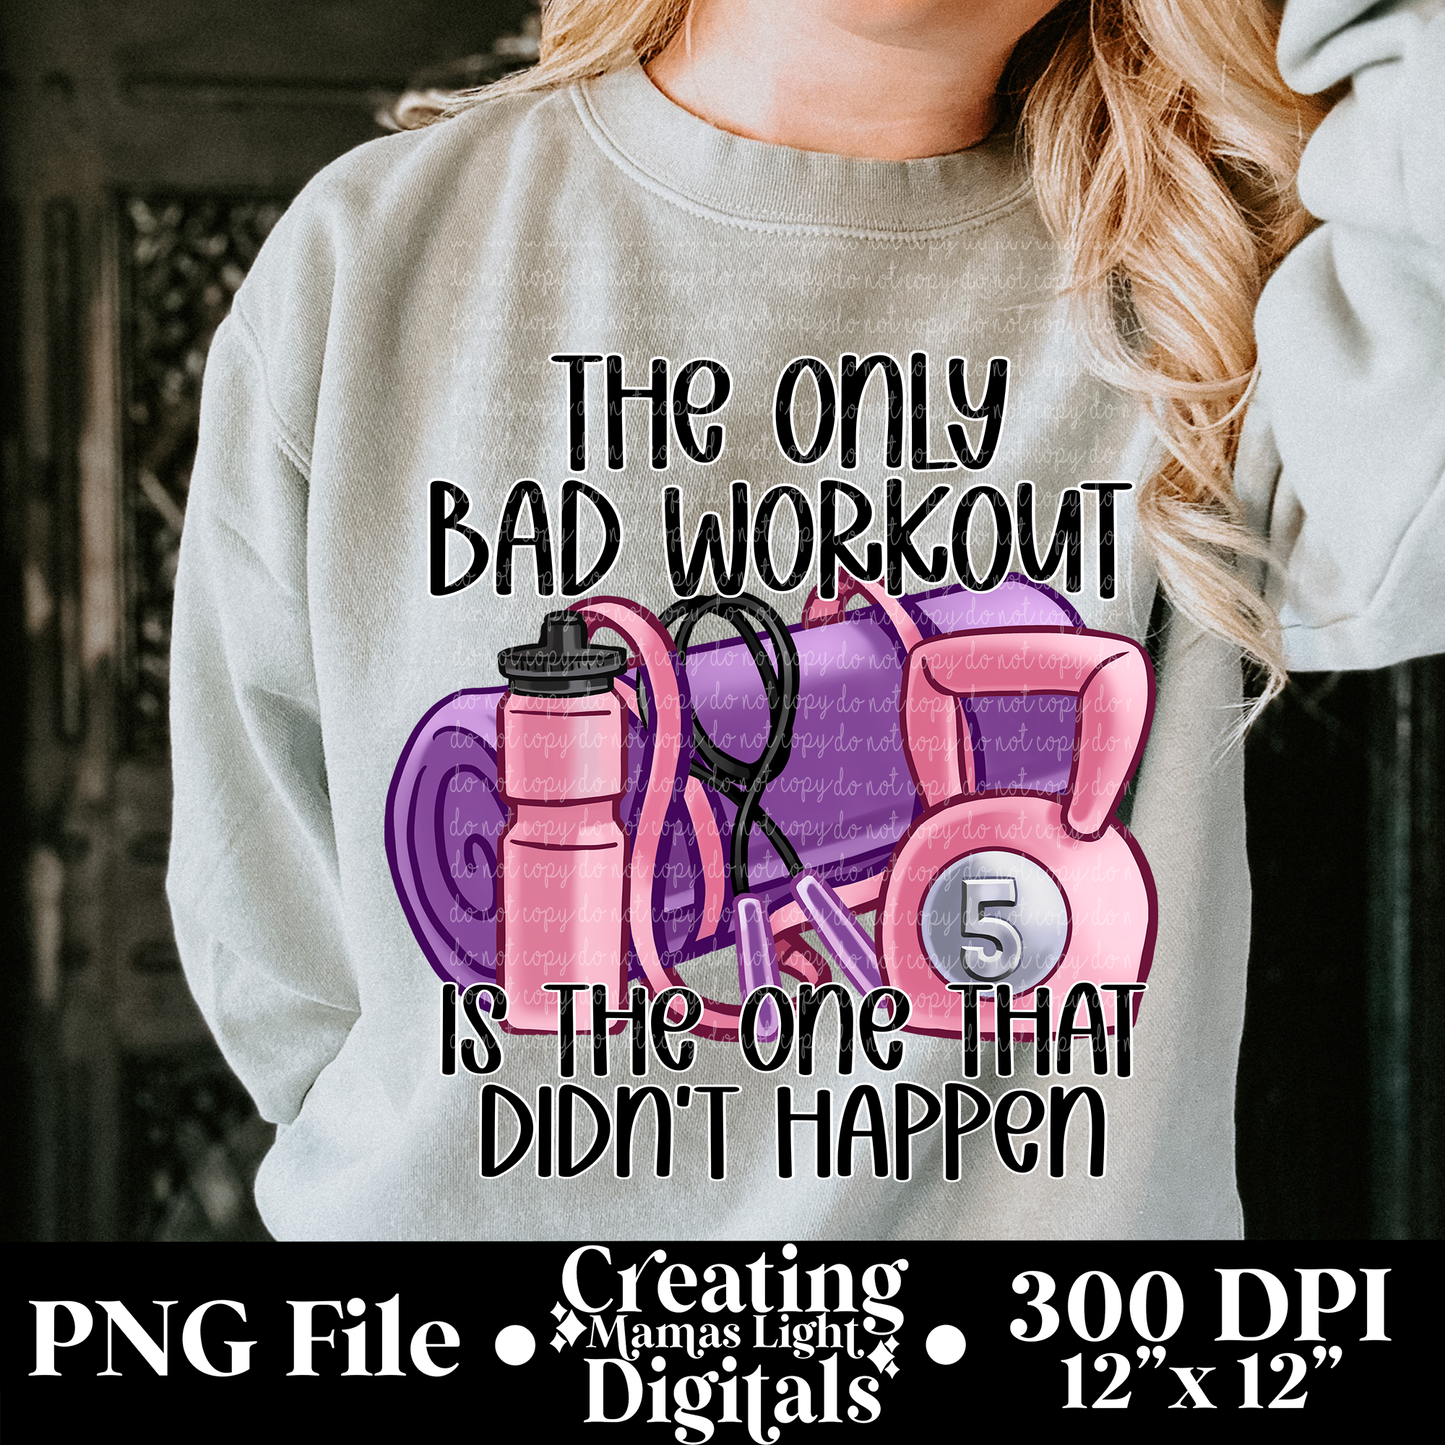 The only bad workout is one that didn’t happen